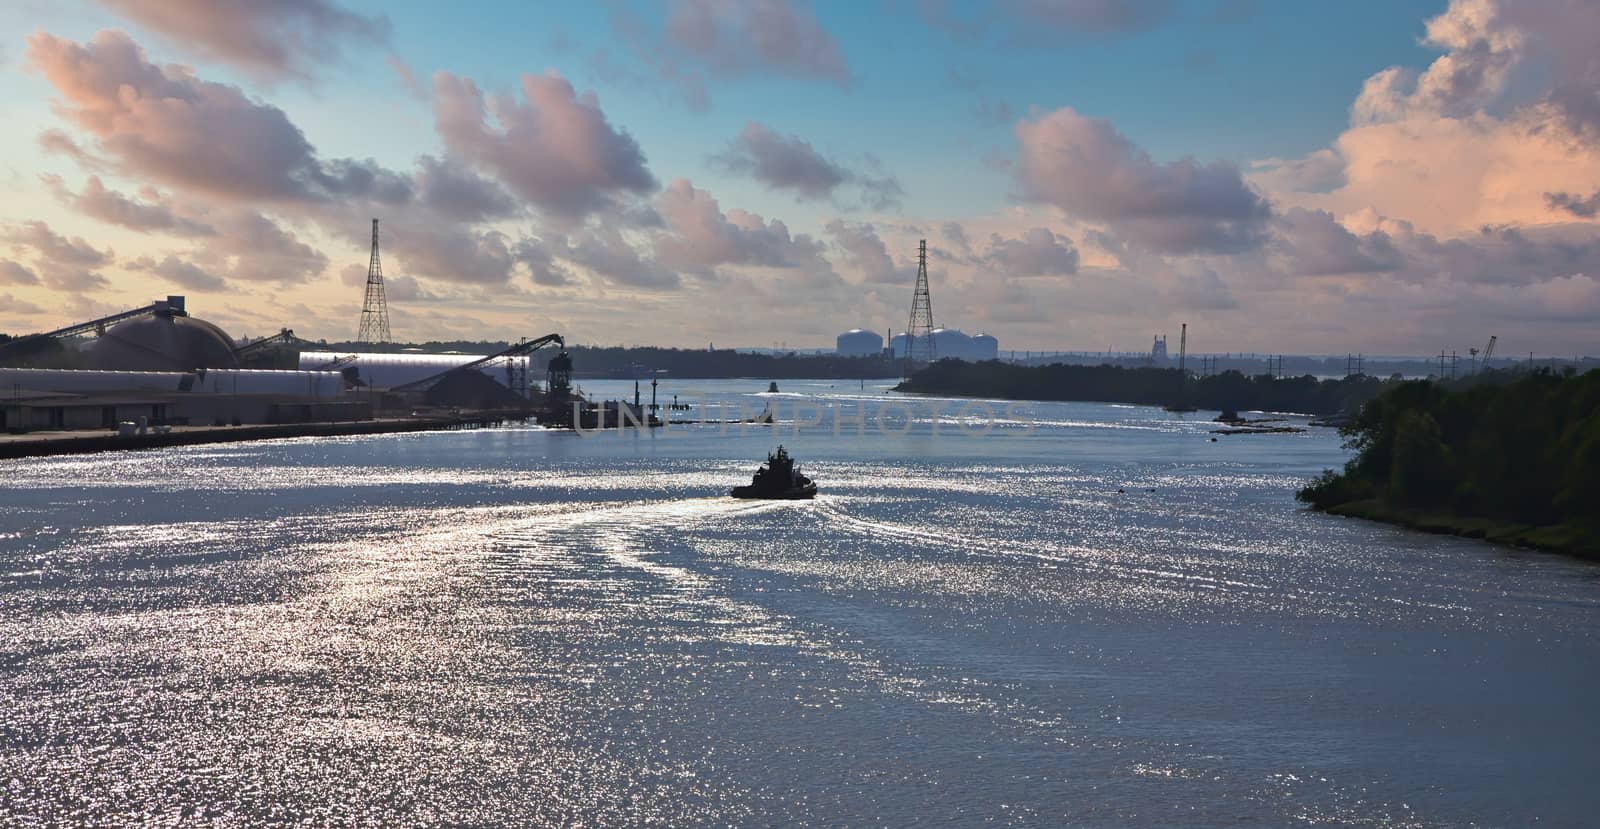 A tugboat heading down the Savannah River in the late afternoon lightg